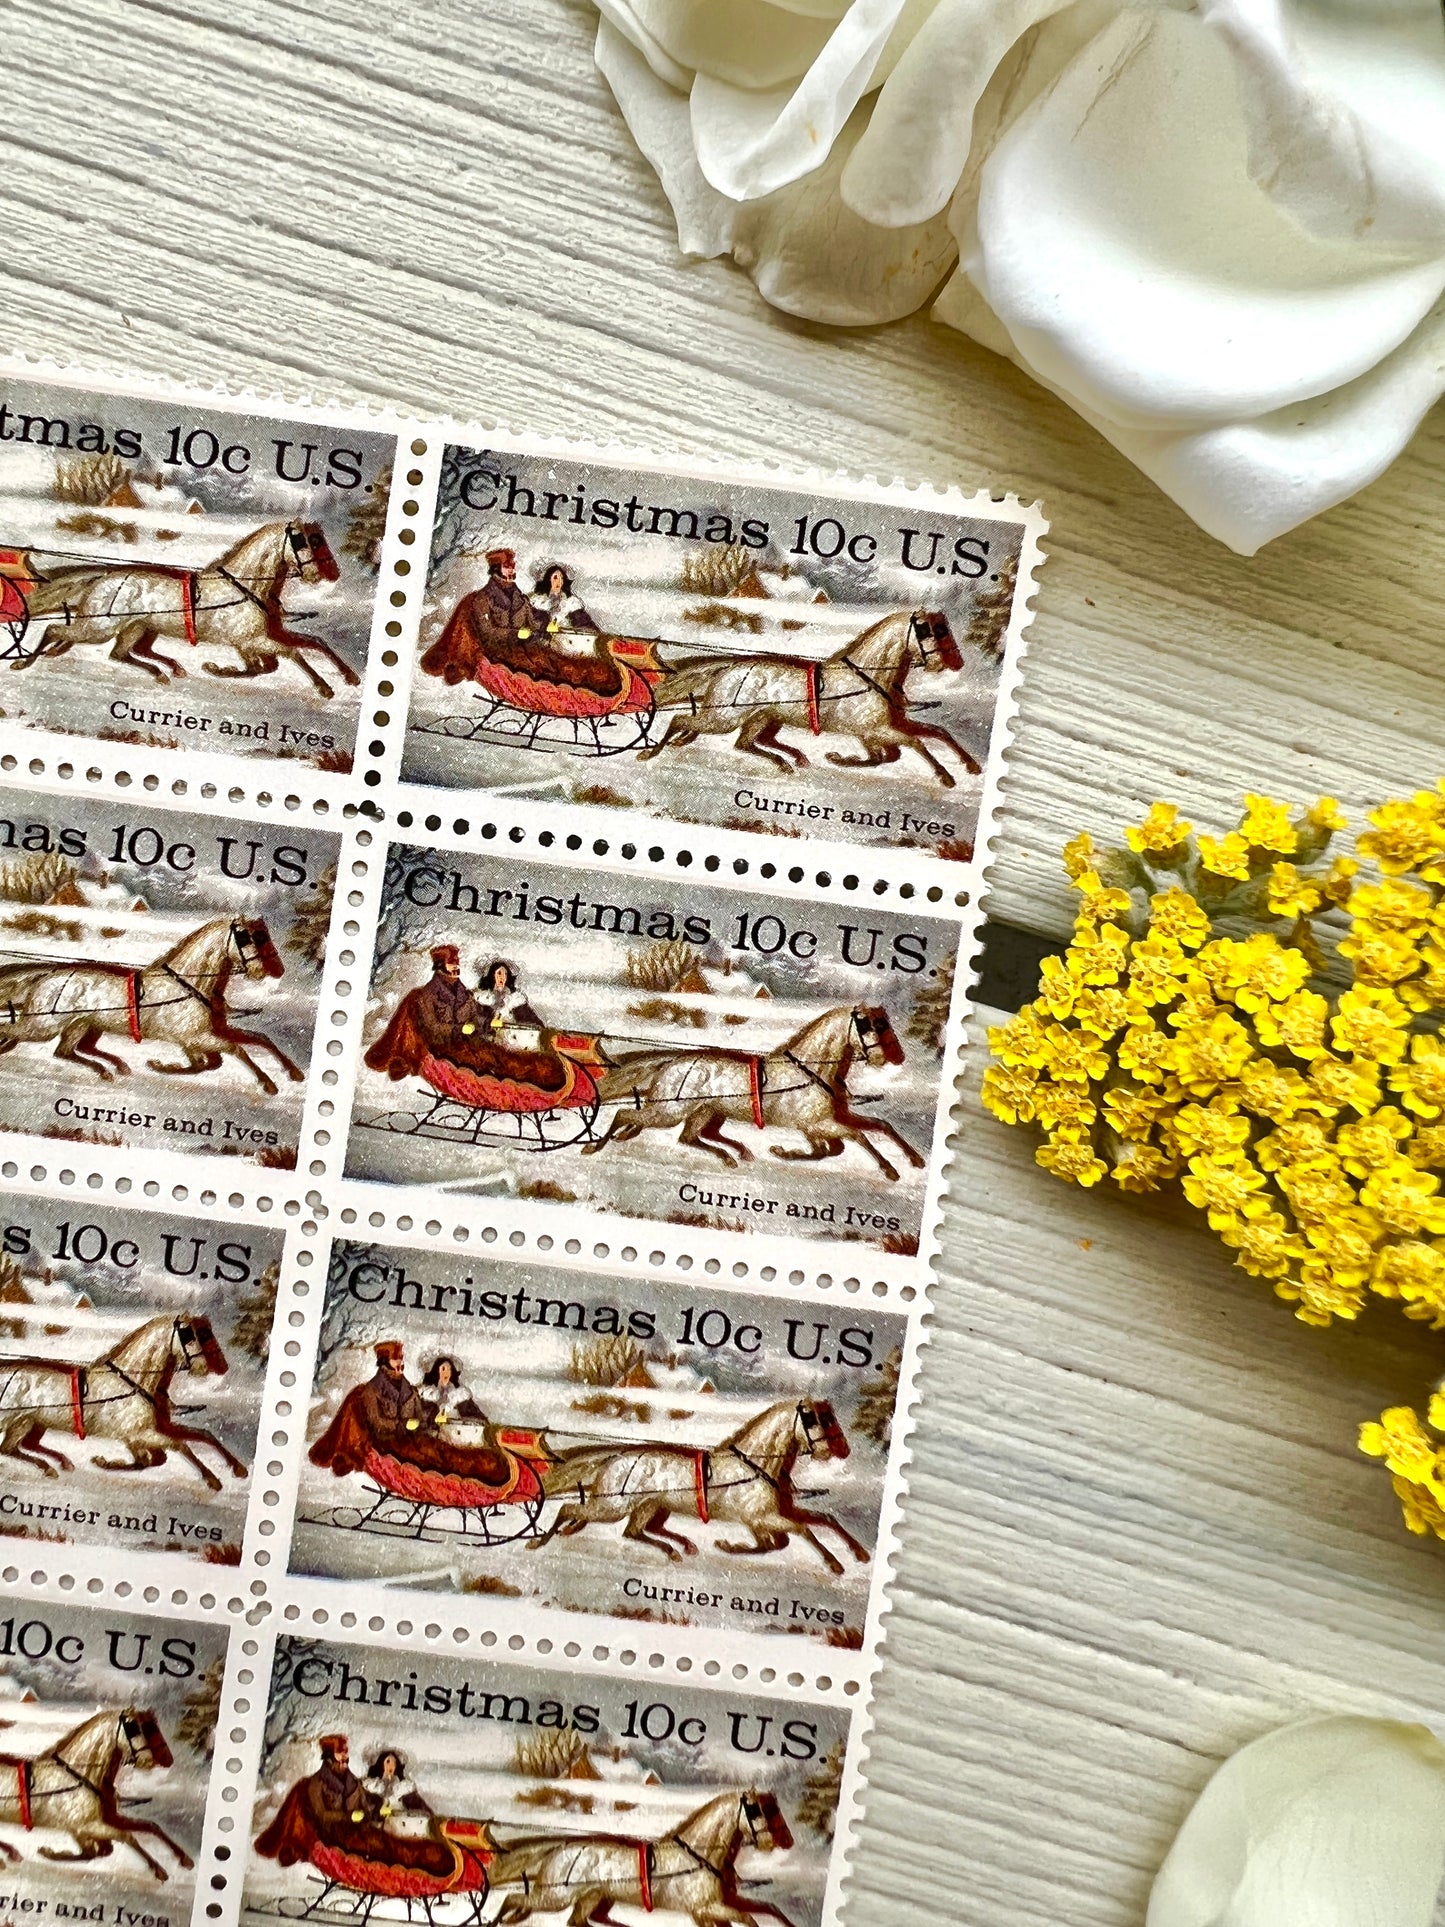 12 Sleigh & Horse Christmas Stamps - Vintage Currier & Ives Holiday Stamps for Mailing from 1974